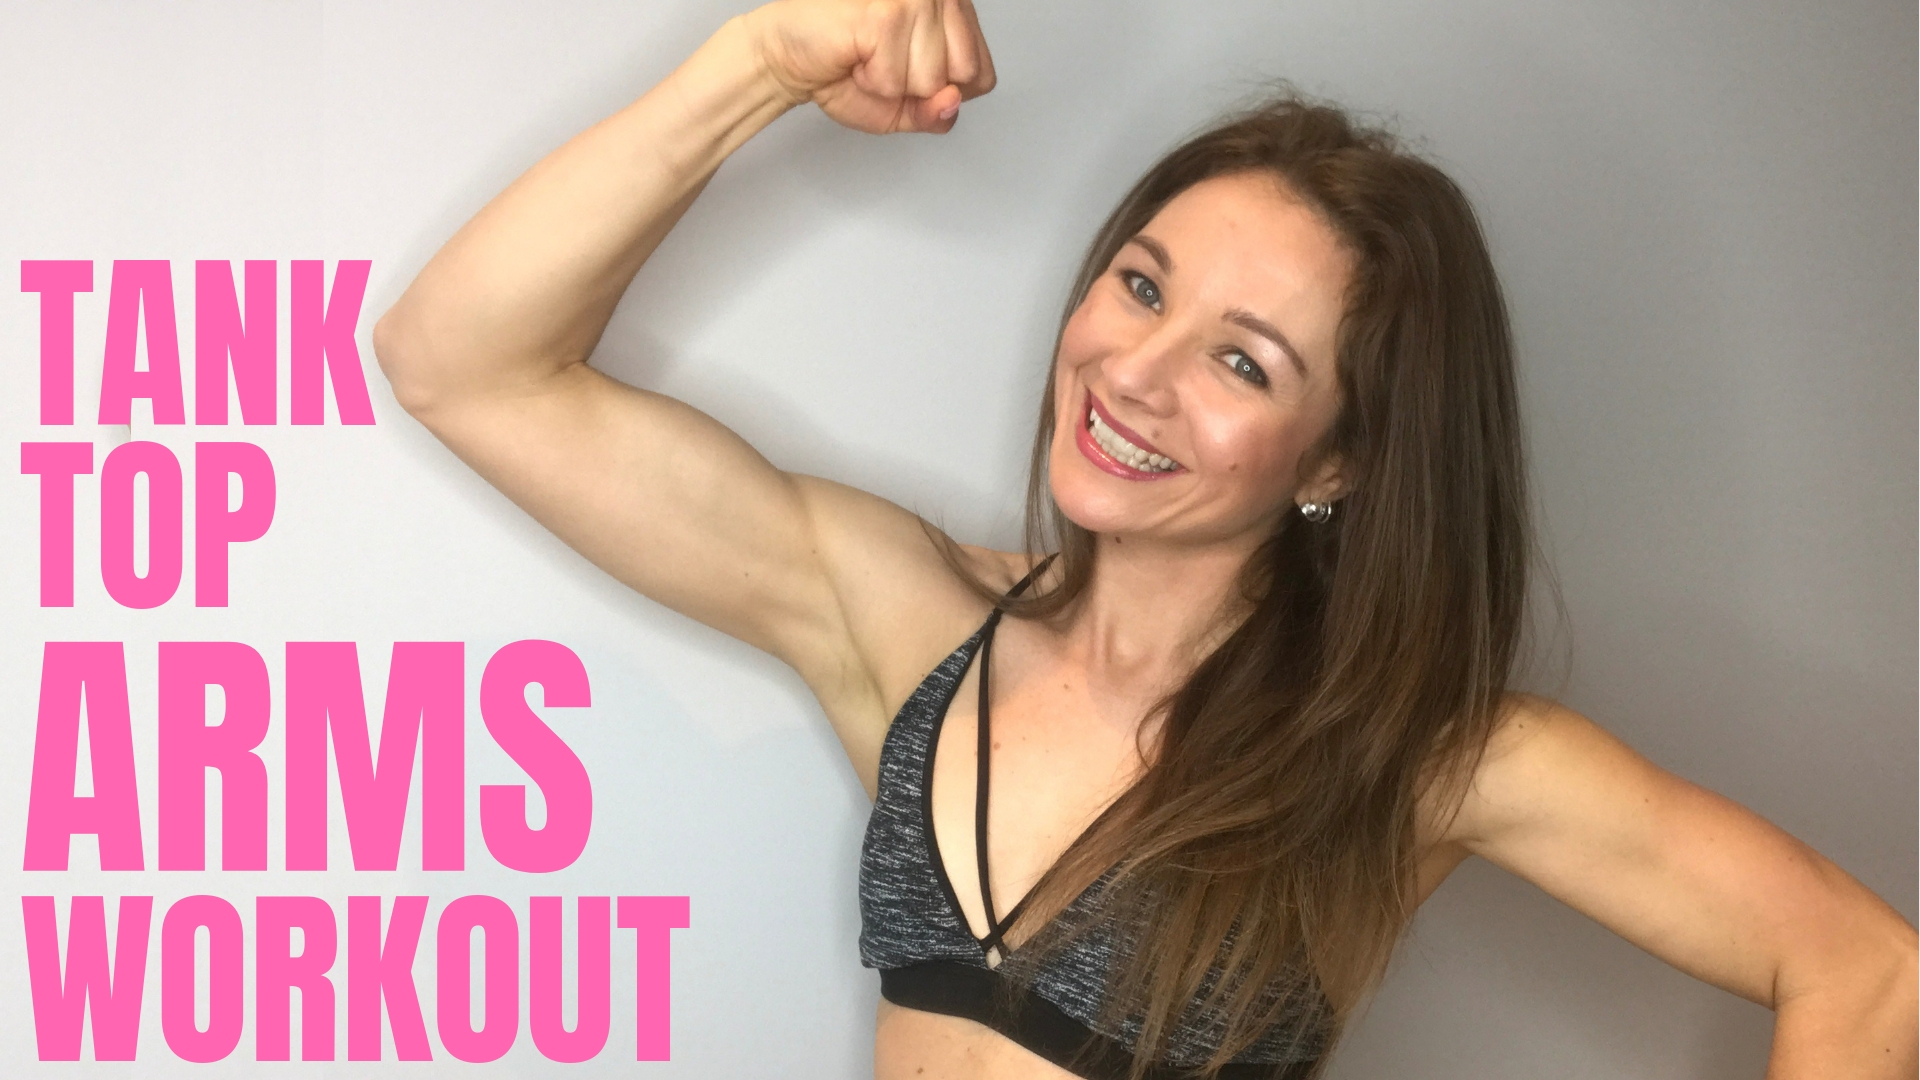 Tank Top Arms Workout (For Sexy Summer Arms) - Strong Mom